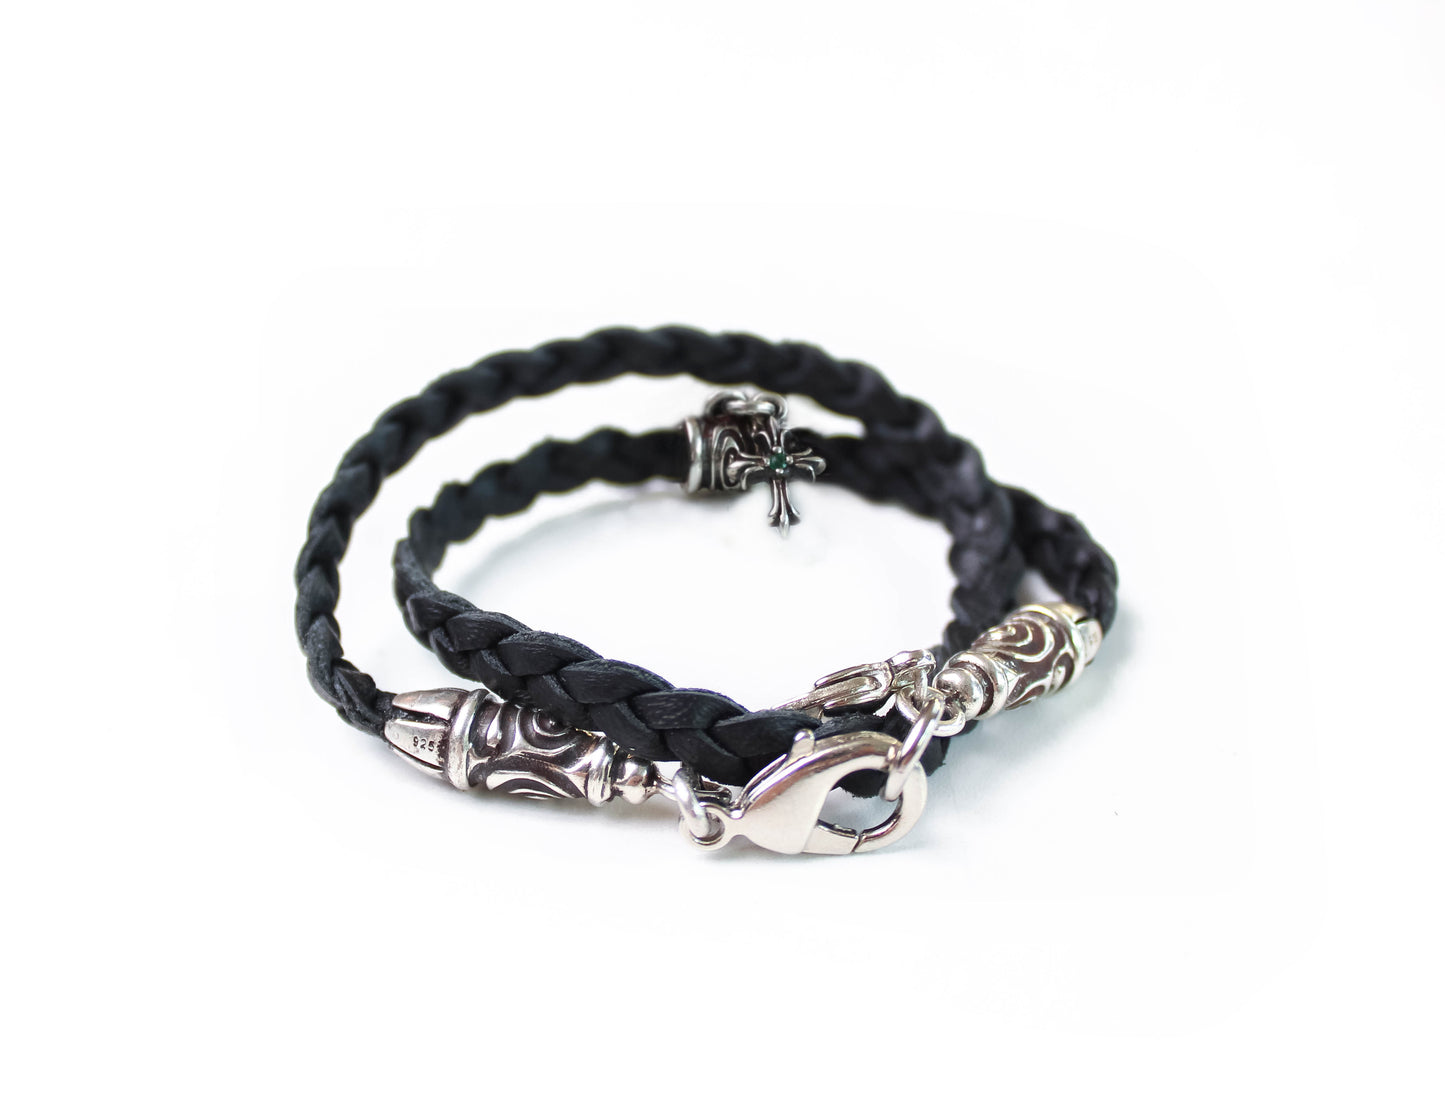 925 Sterling Silver & Genuine Leather Bracelet/Choker/Strap with three double strands braided by hand, Brown or Black.- P24